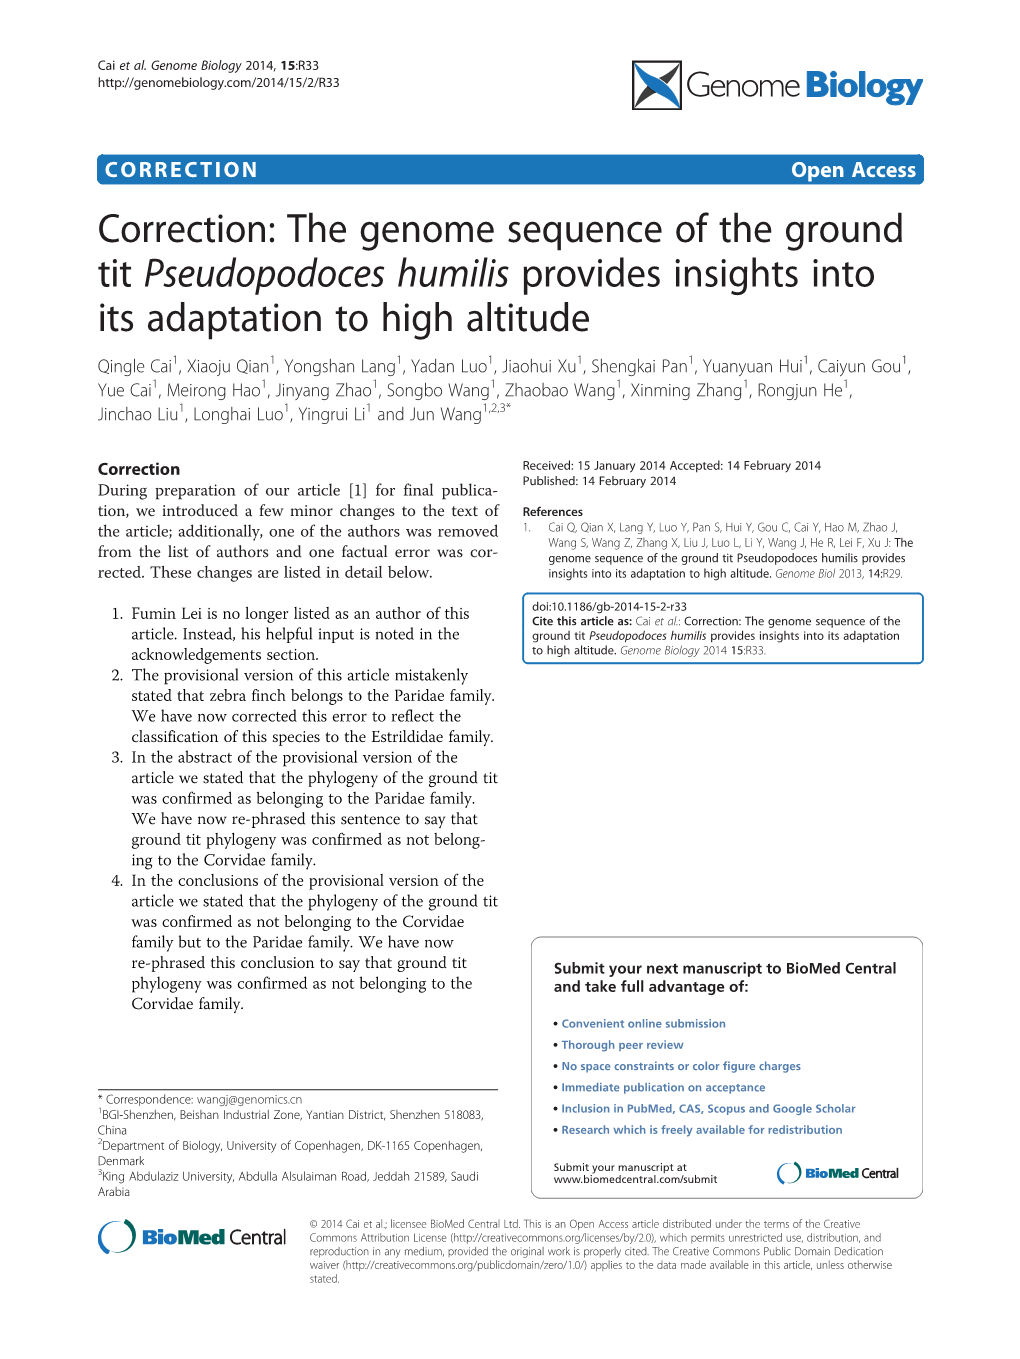 Correction: the Genome Sequence of the Ground Tit Pseudopodoces